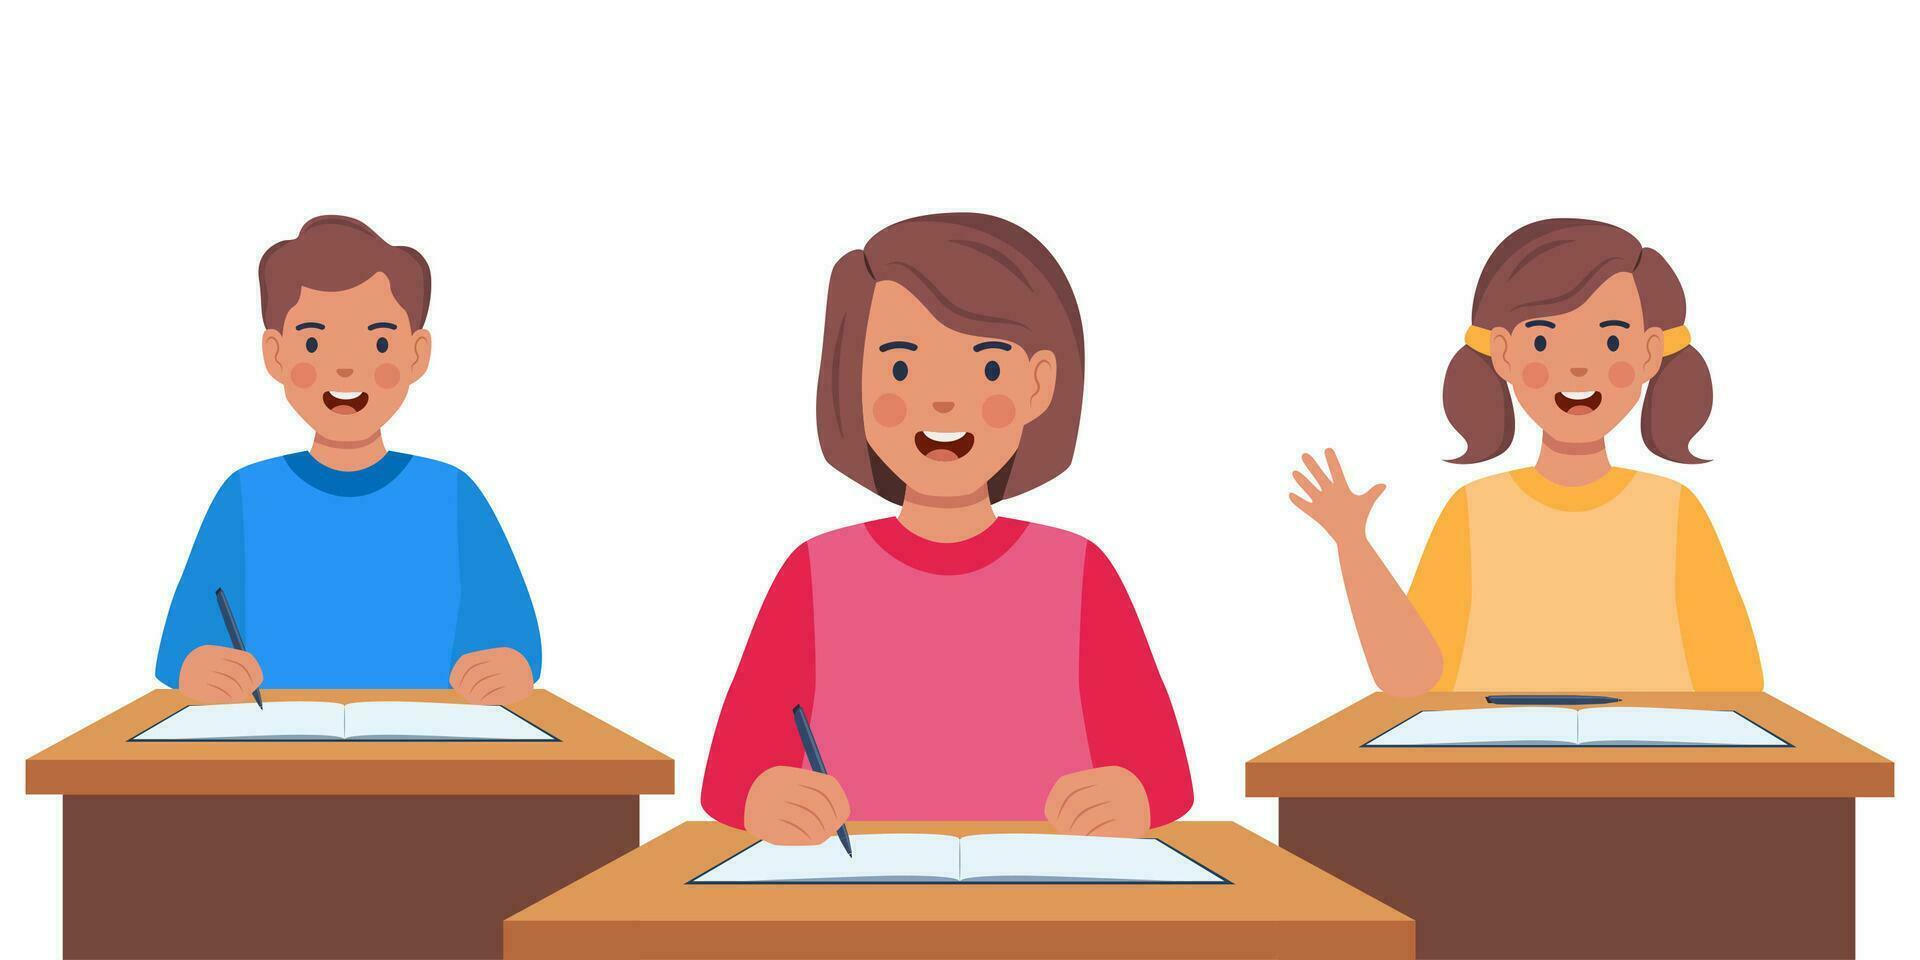 Primary school pupils sit at desk. Elementary education, children writing in copybook, raising hand to answer. Kids getting knowledge on lesson in class. Vector illustration.